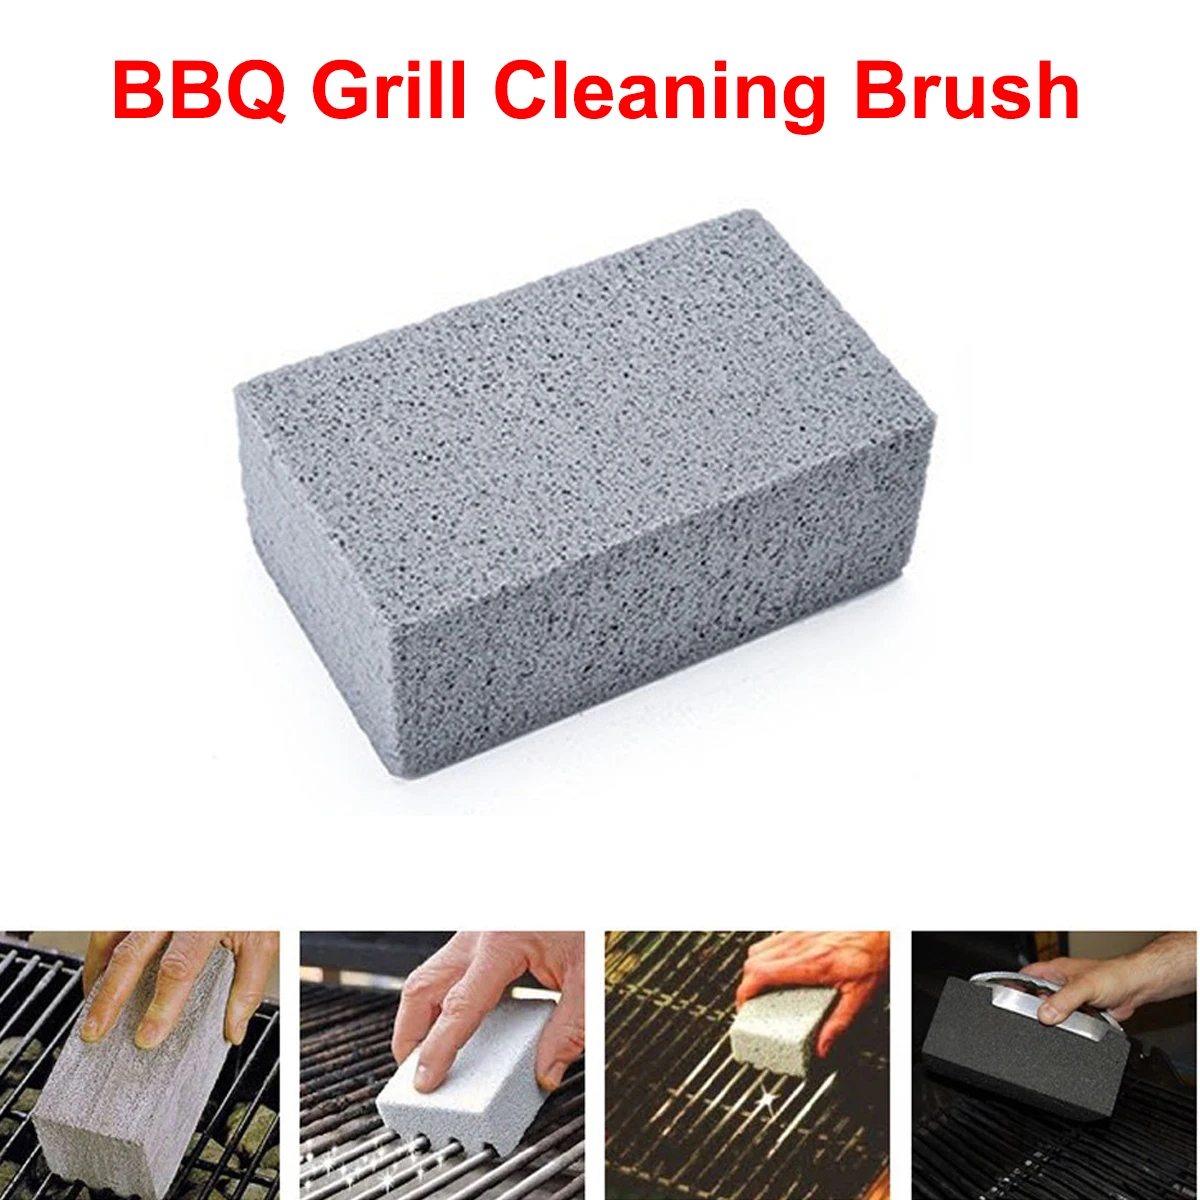 1Pcs Grill Cleaning Brick Pumice Stone De-Scaling Cleaning Block for BBQ Racks Flat Top Cookers Pool BBQ Cleaning Brush